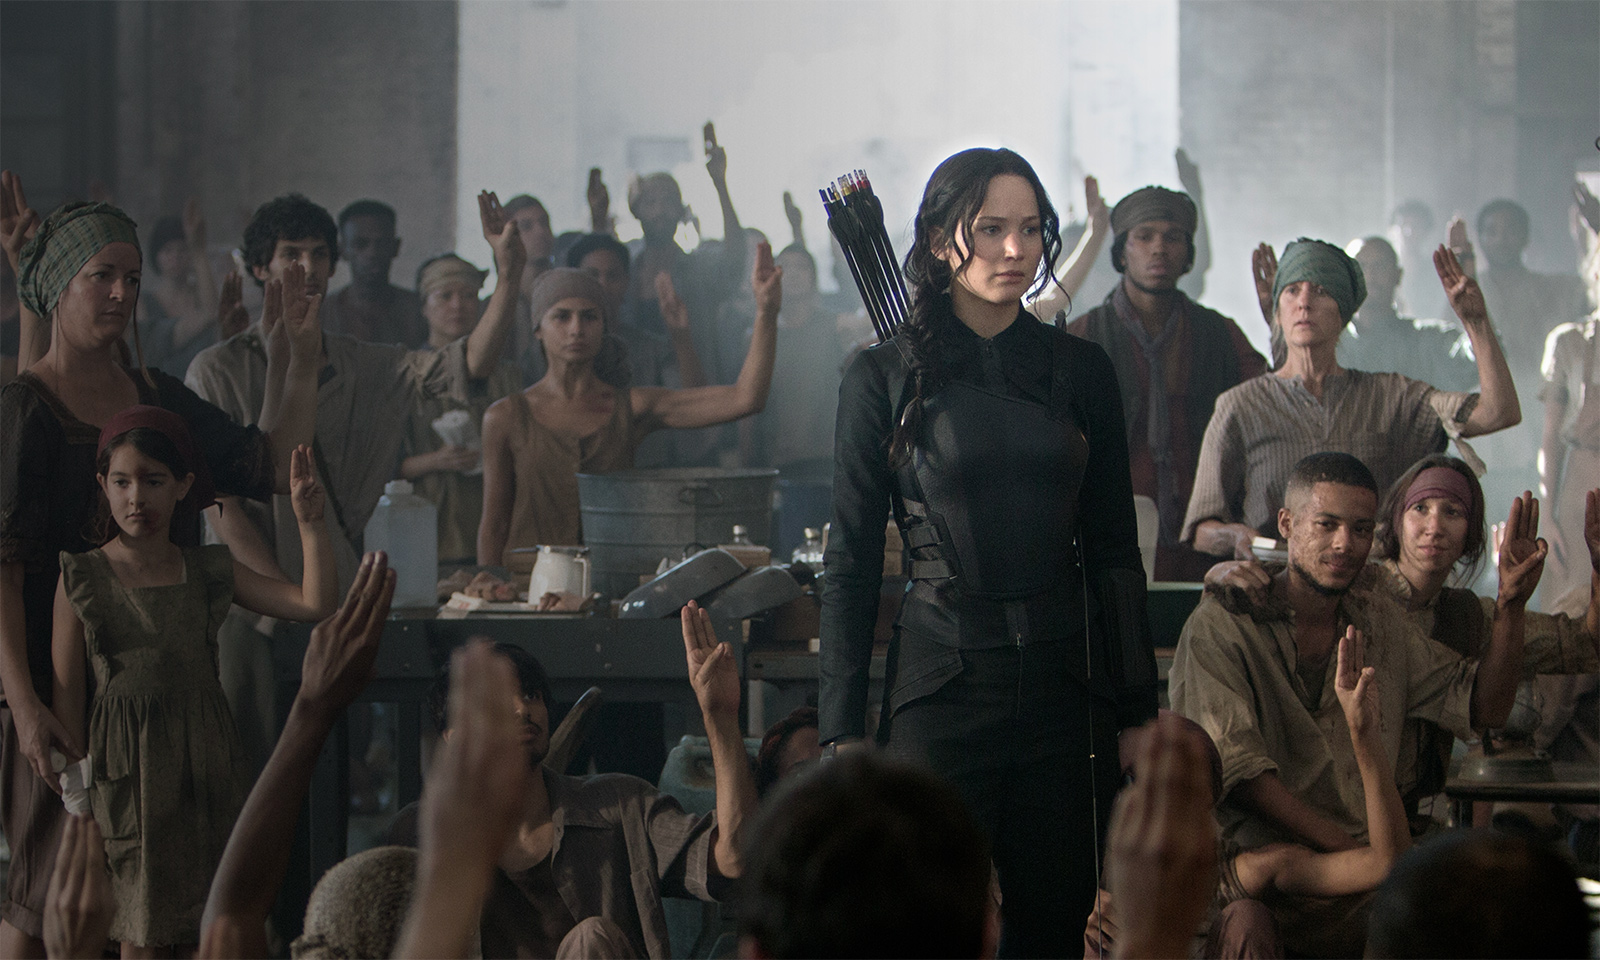 Lawrence, Francis. The Hunger Games: Mockingjay Part 1, 2014